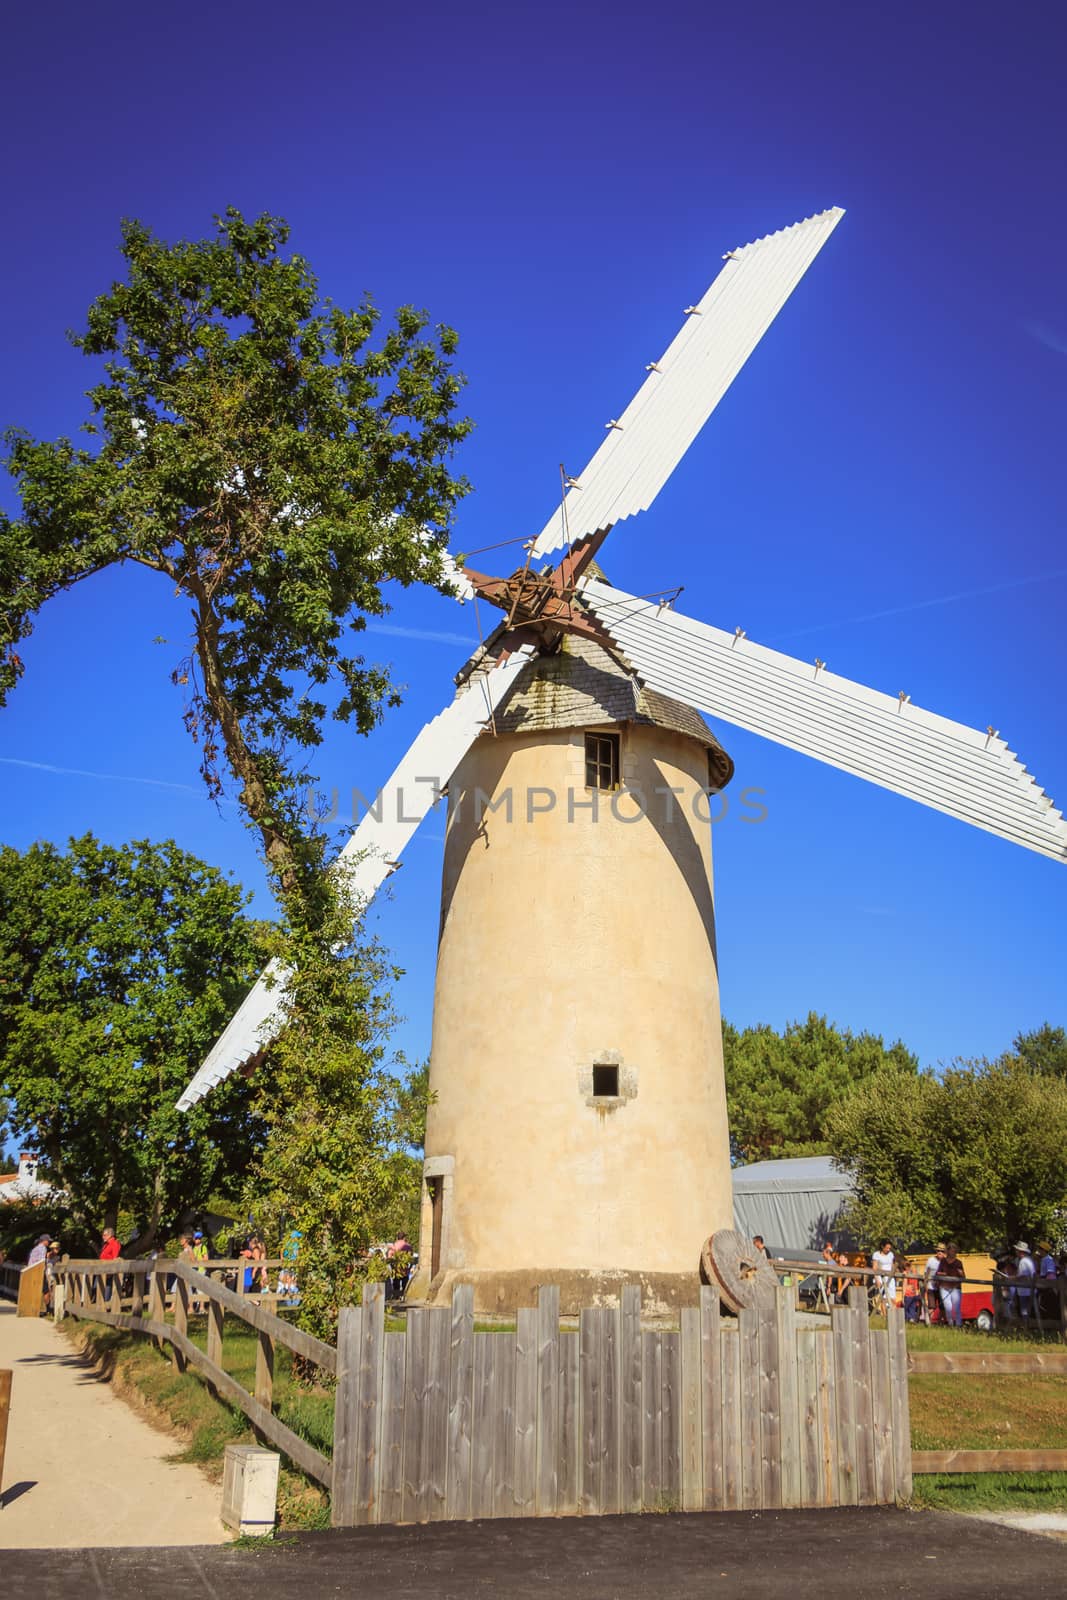 Saint Reverend, France - July 24, 2016 : architecture detail of the windmill still active on a summer day